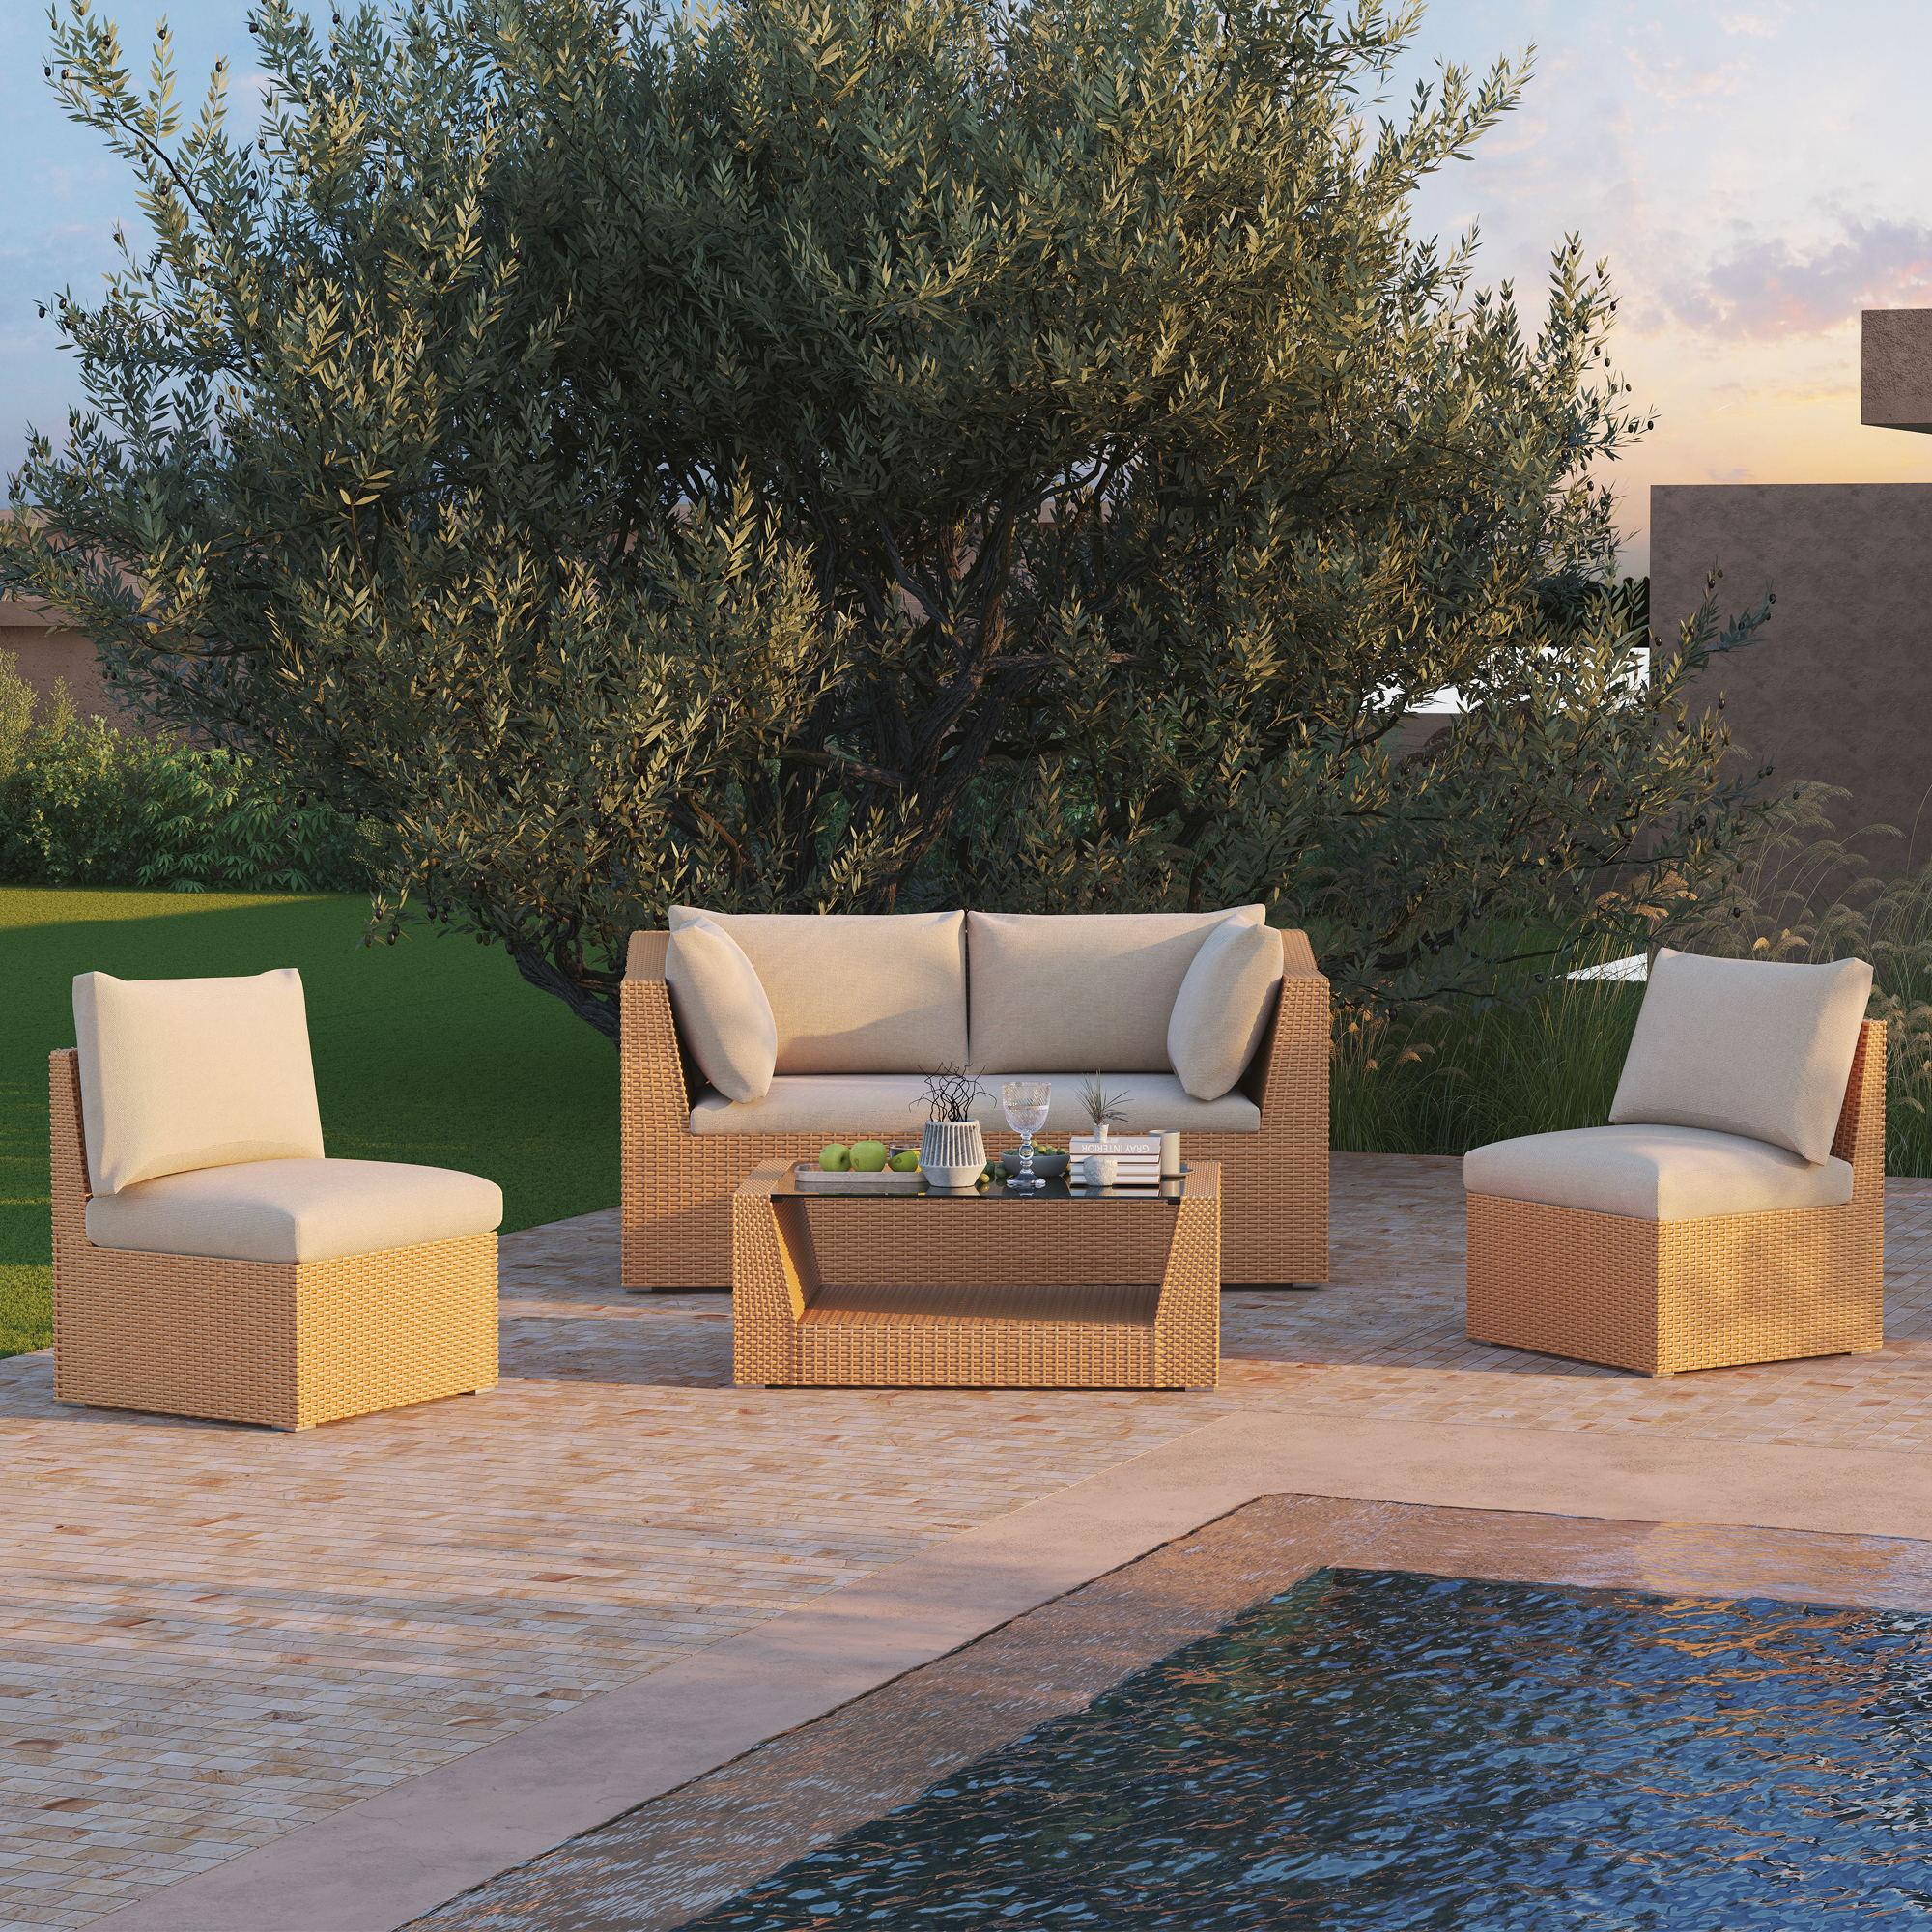 Elba Modern Wicker Outdoor Furniture, natural color Rattan Outdoor Sectional Sofa Set with beige cushions- Jardina Furniture